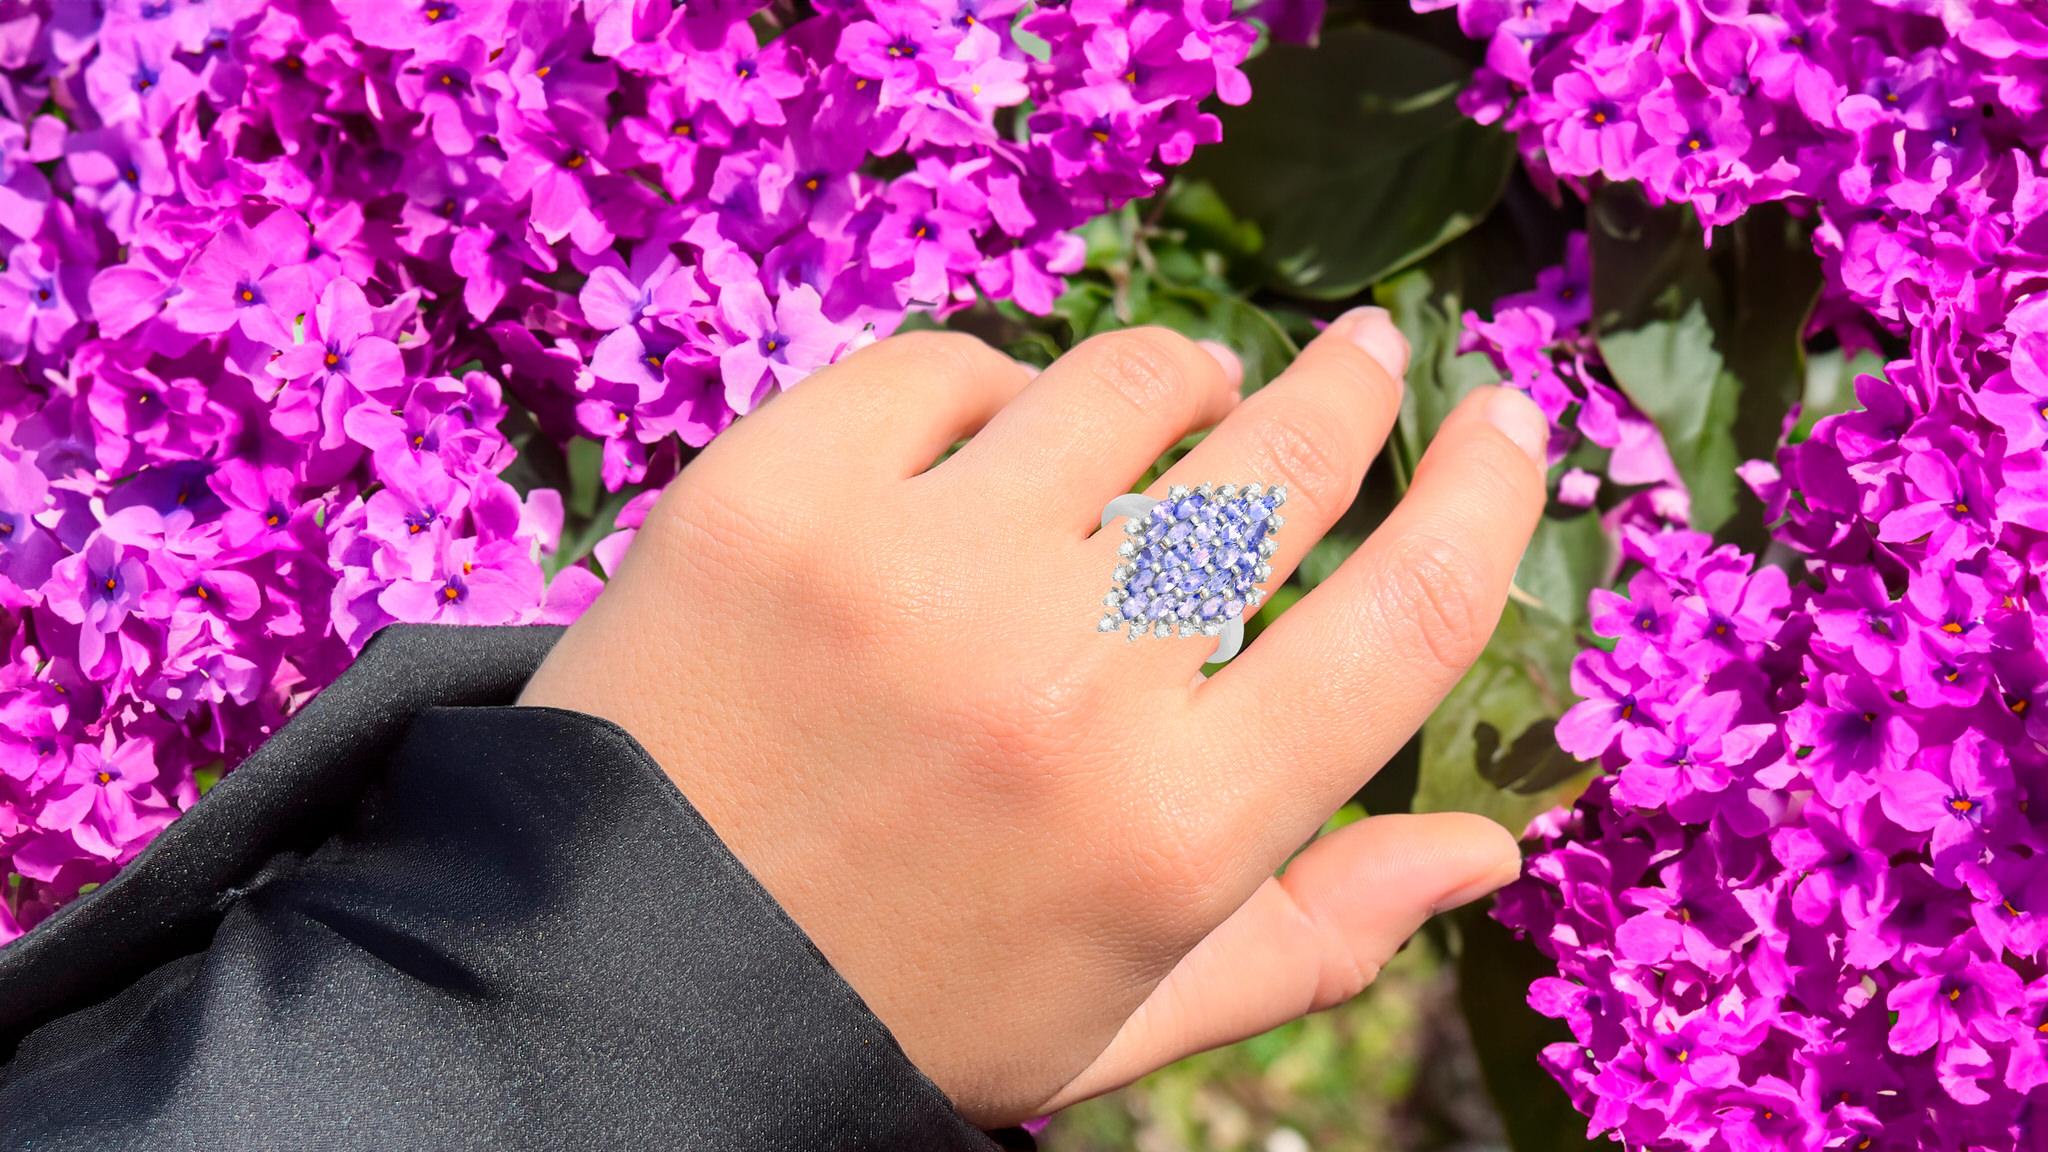 Marquise Cut Tanzanites Cluster Ring White Topazes 2.40 Carats In Excellent Condition For Sale In Laguna Niguel, CA